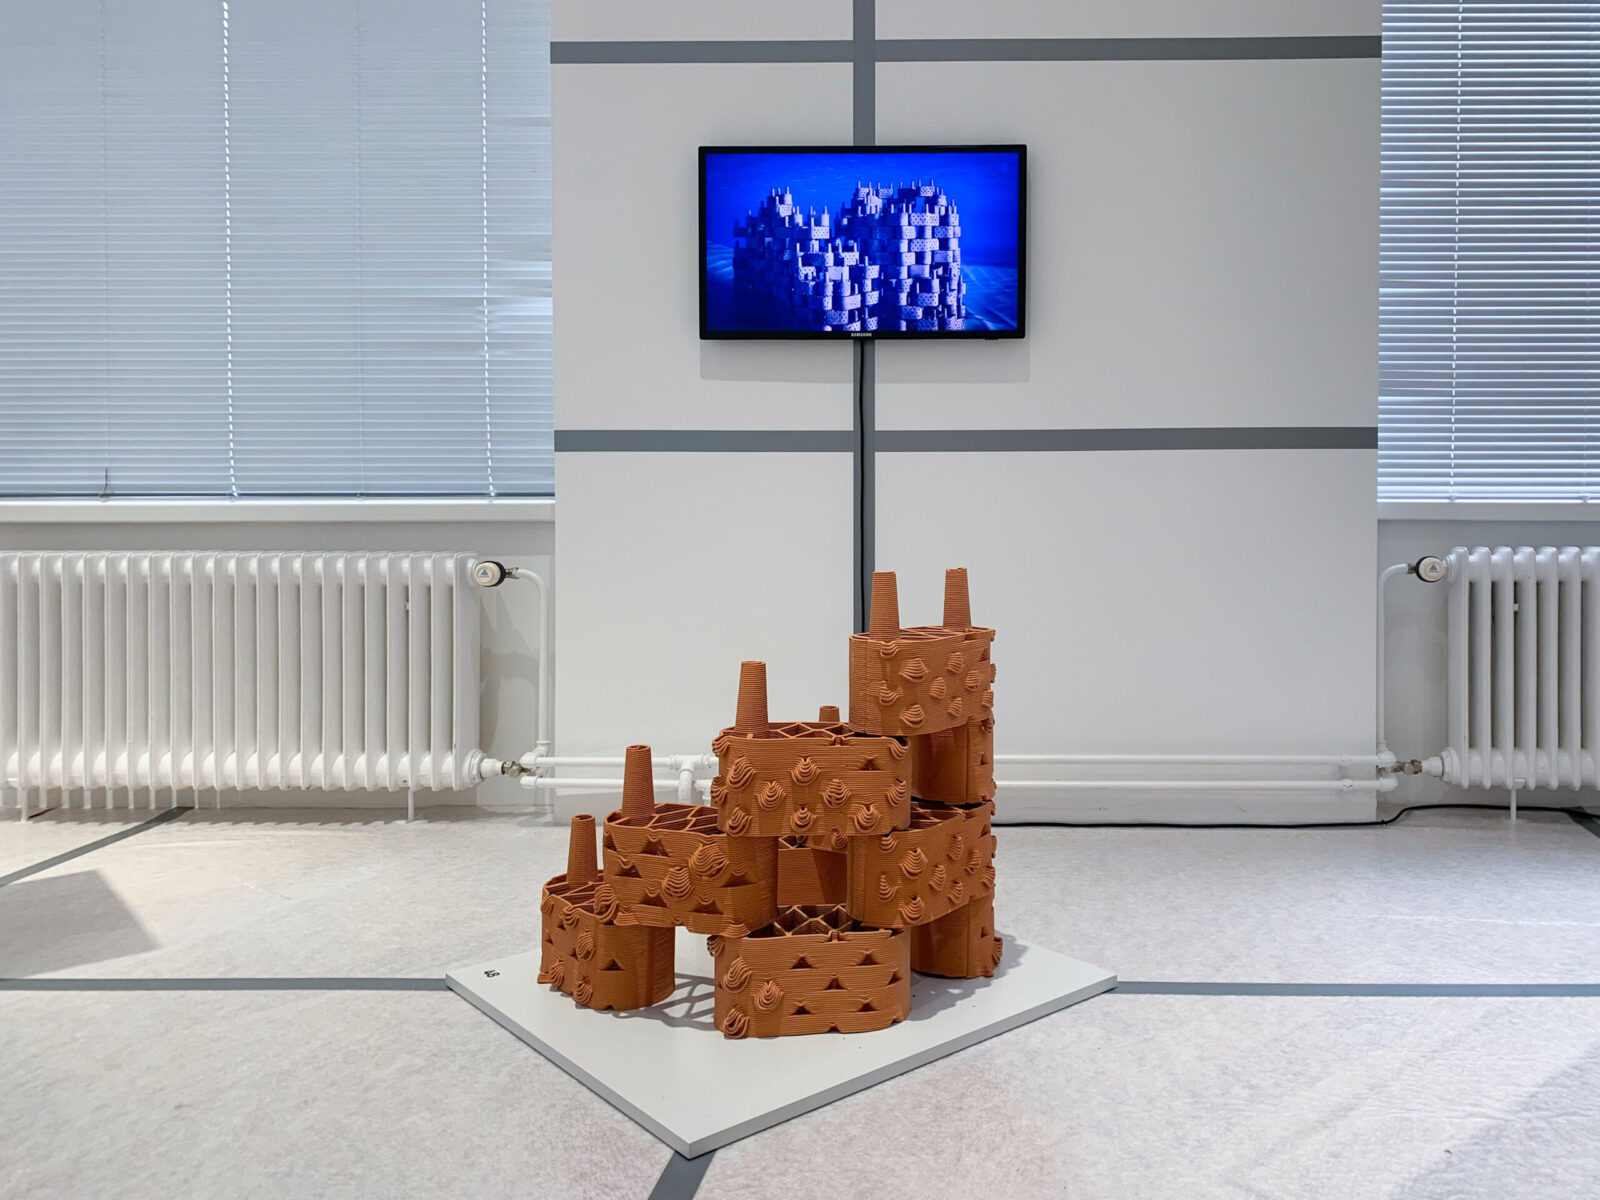 Exhibited at the Gewerbemuseum in Winterthur, some clay bricks and an explicative video show how this interdisciplinary project will help sustain coral reefs in tropical regions. © Marie Griesmar/rrreefs